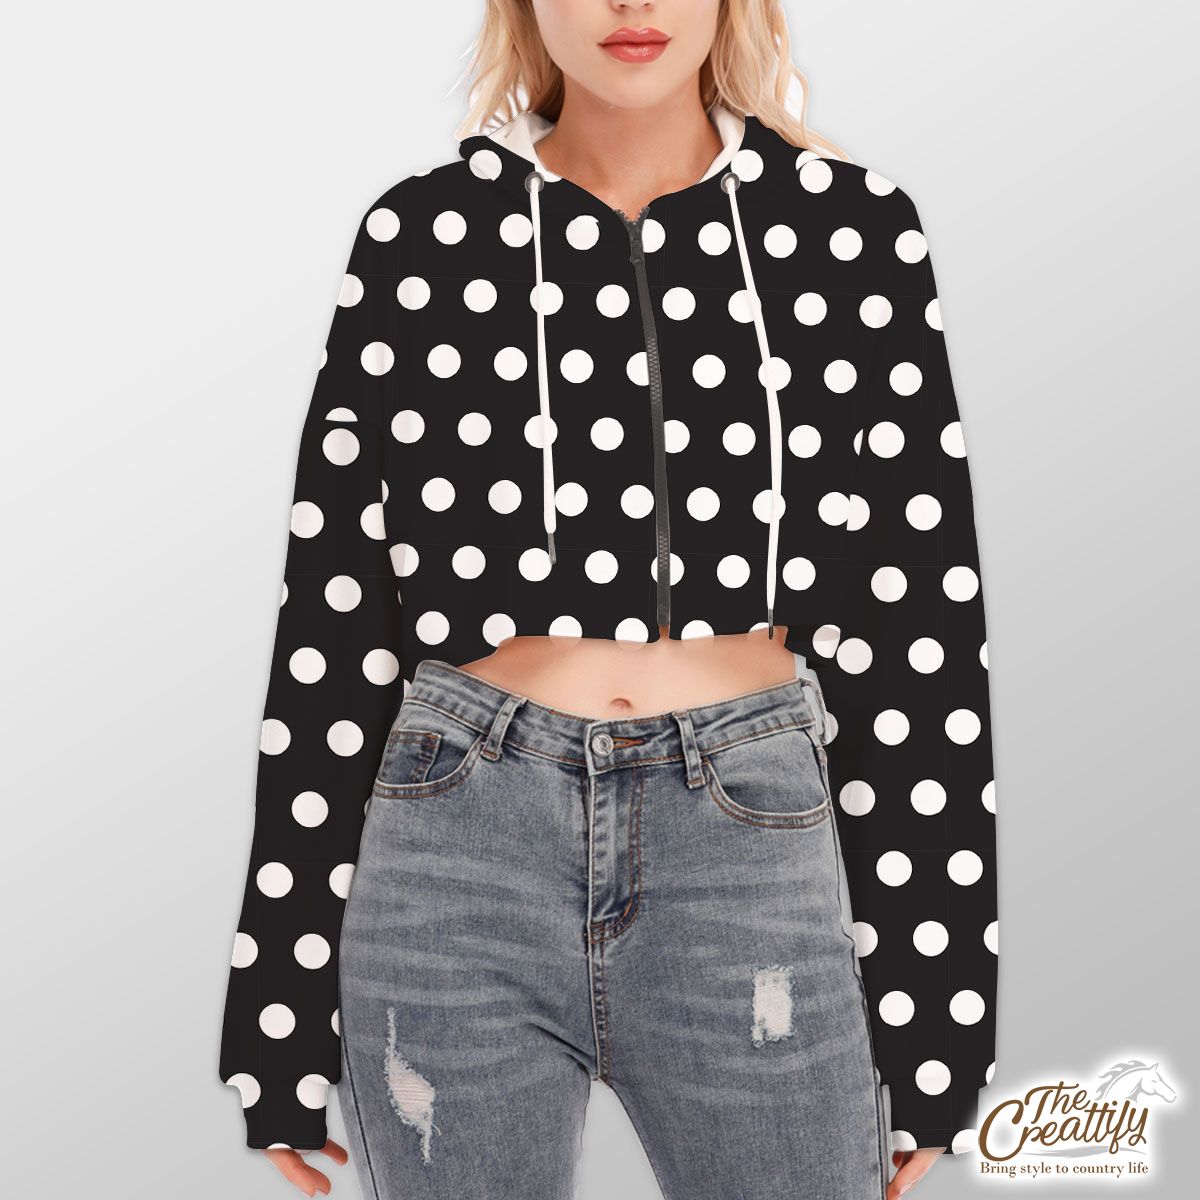 White Dot Pattern On Black Background Halloween Hoodie With Zipper Closure